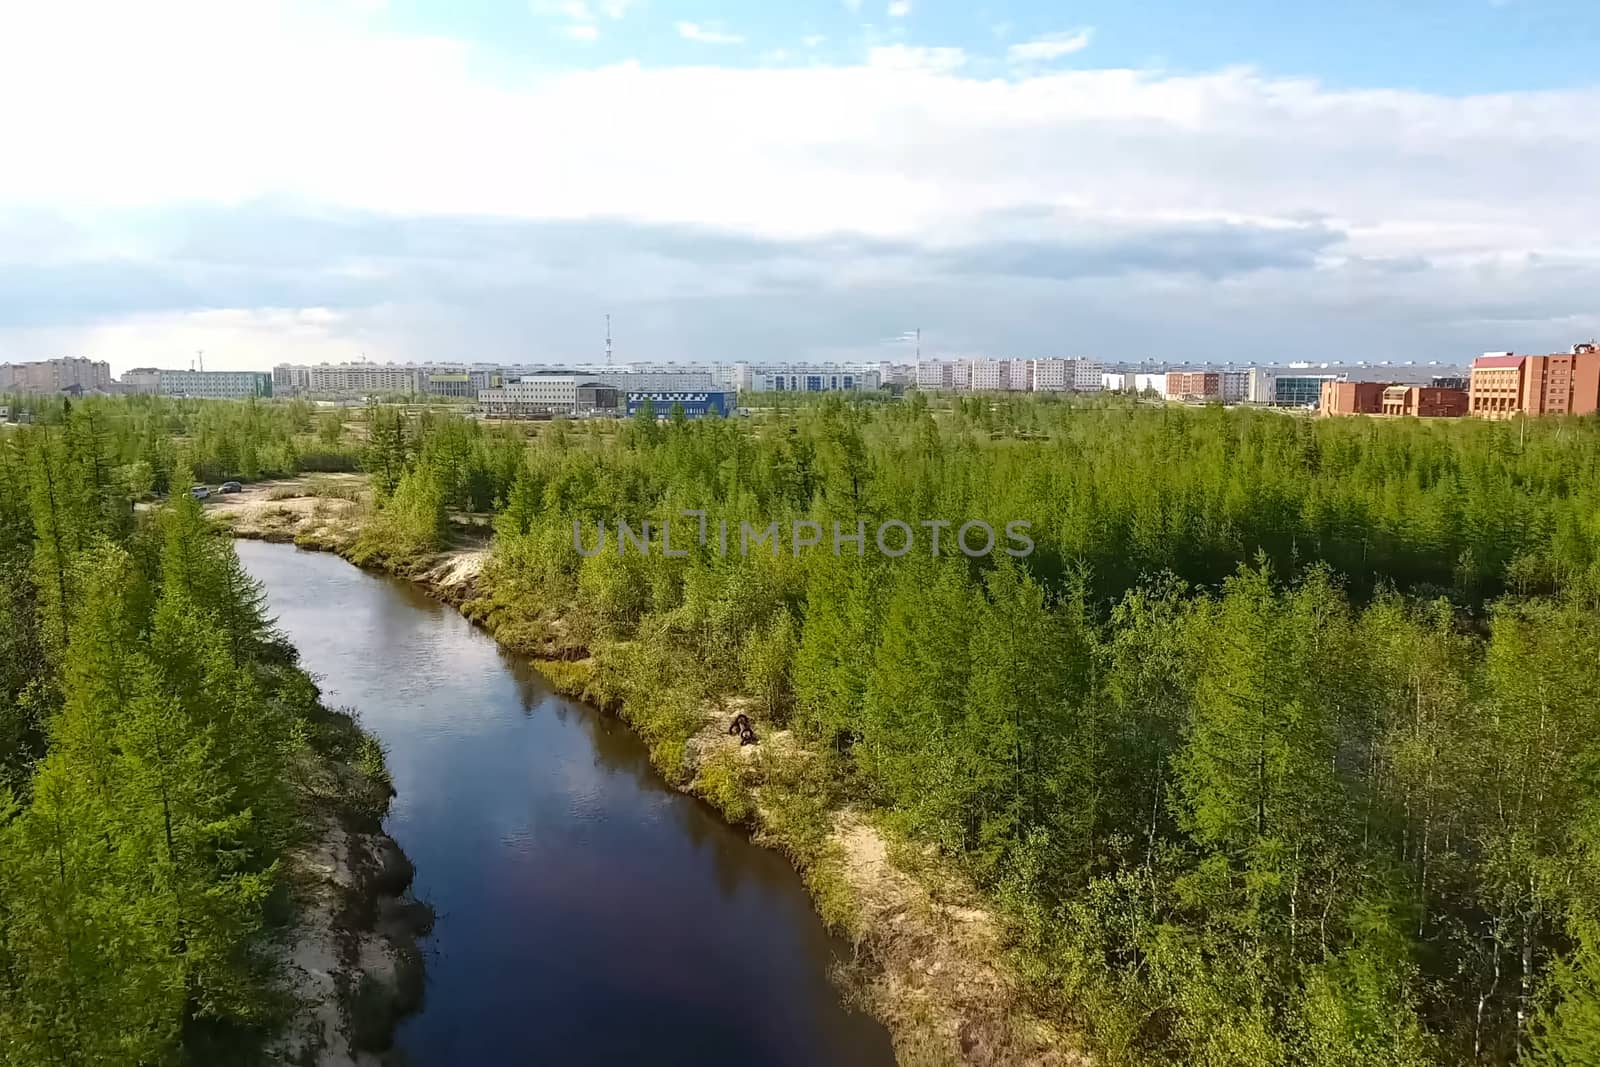 A river in the taiga near the town of New Urengoy.